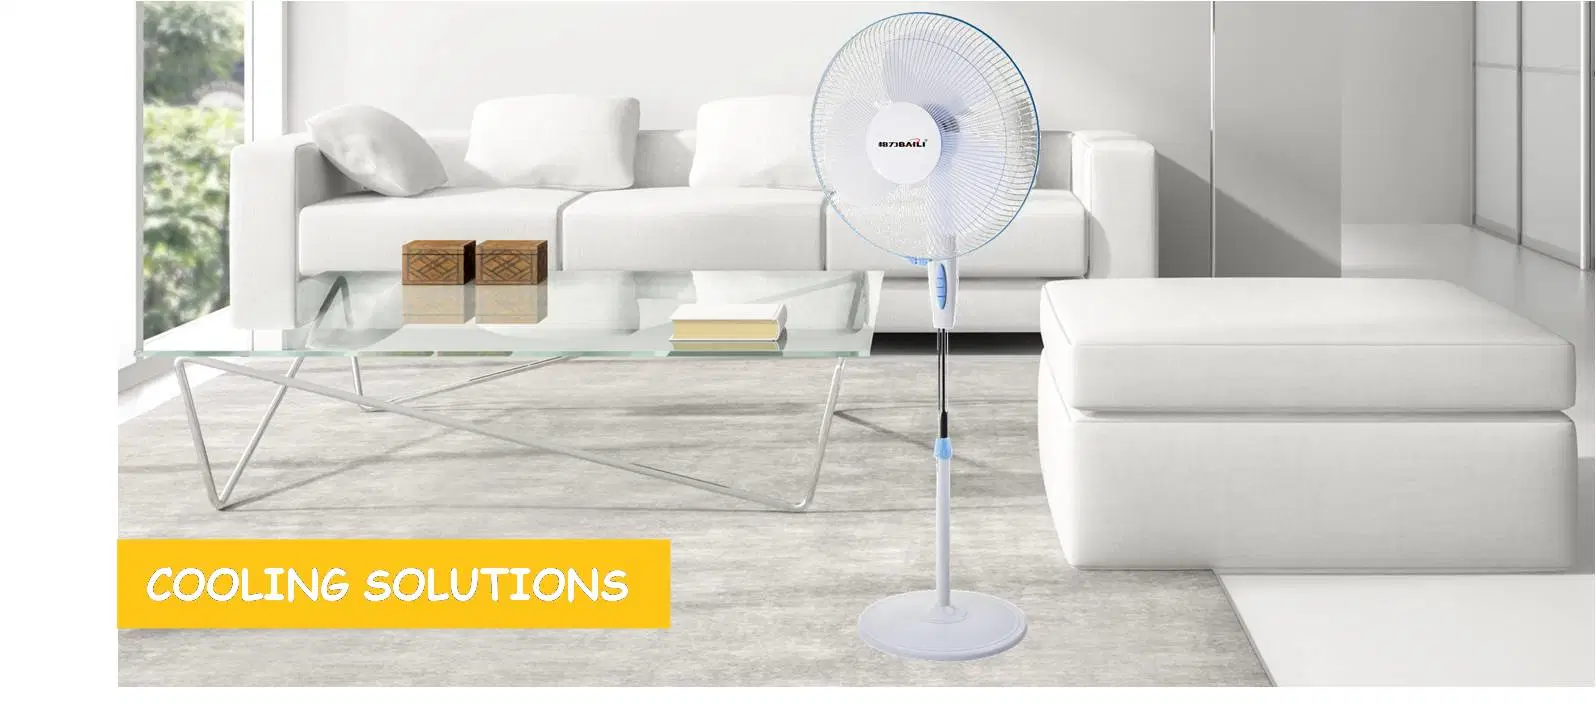 Baili 16" Oscillating Stand Fan with Round Base